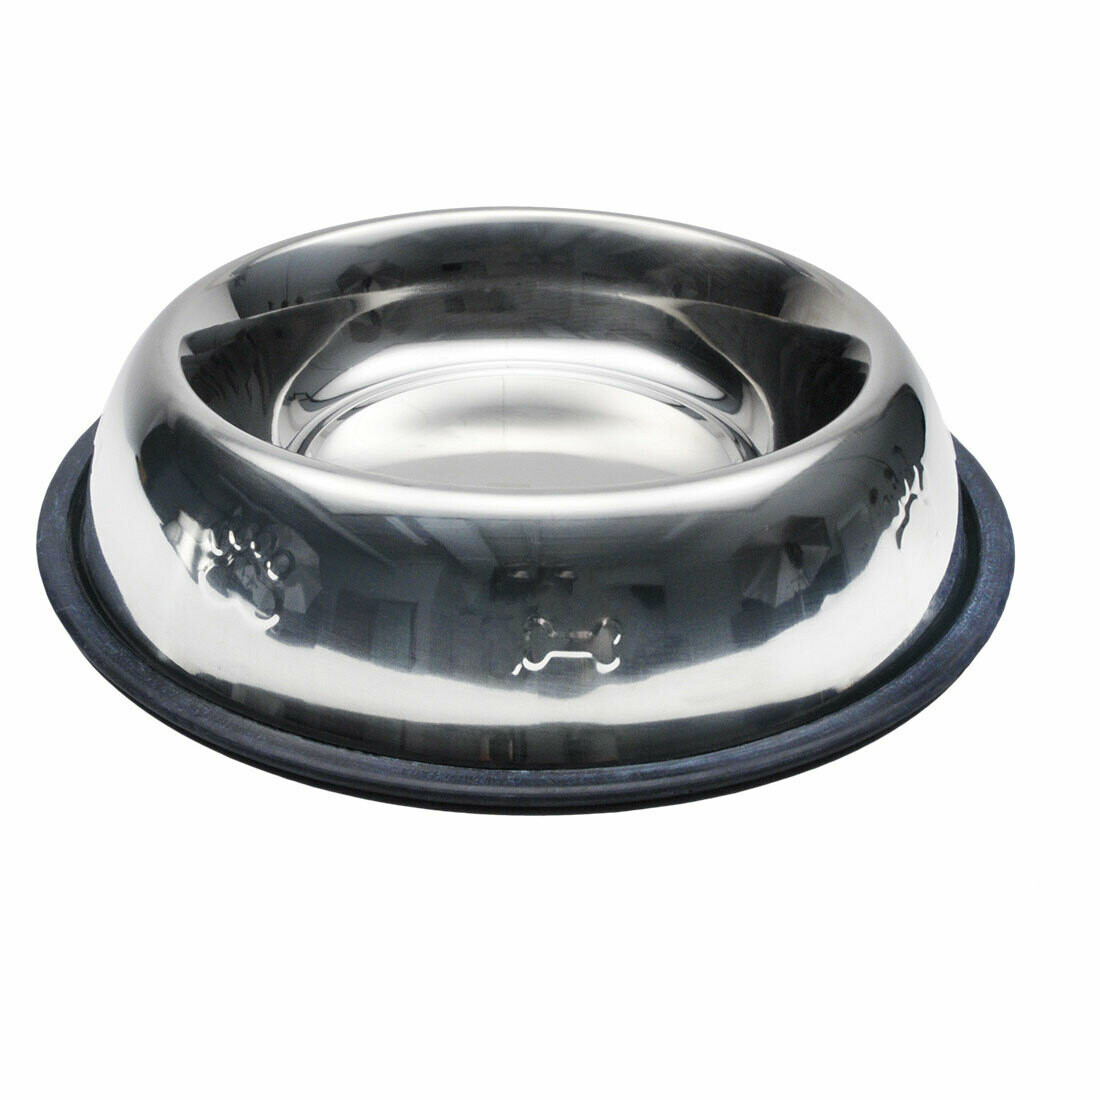 Maslow Non-Skid Embossed Stainless Steel Bowl 473ml